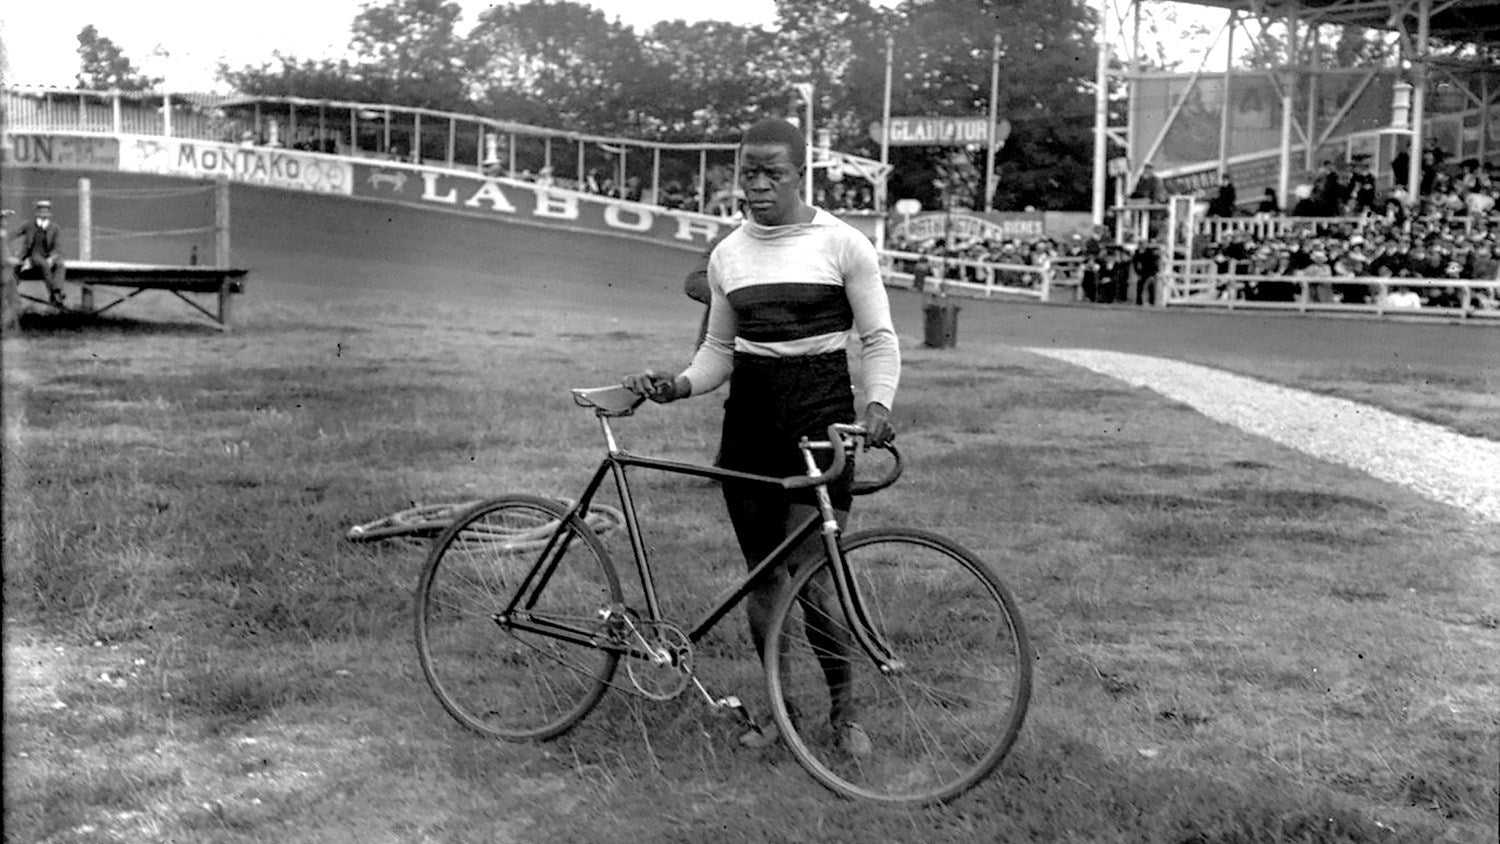 Forgotten no more, Delaware cyclists teach kids lessons of Black cycling superstar